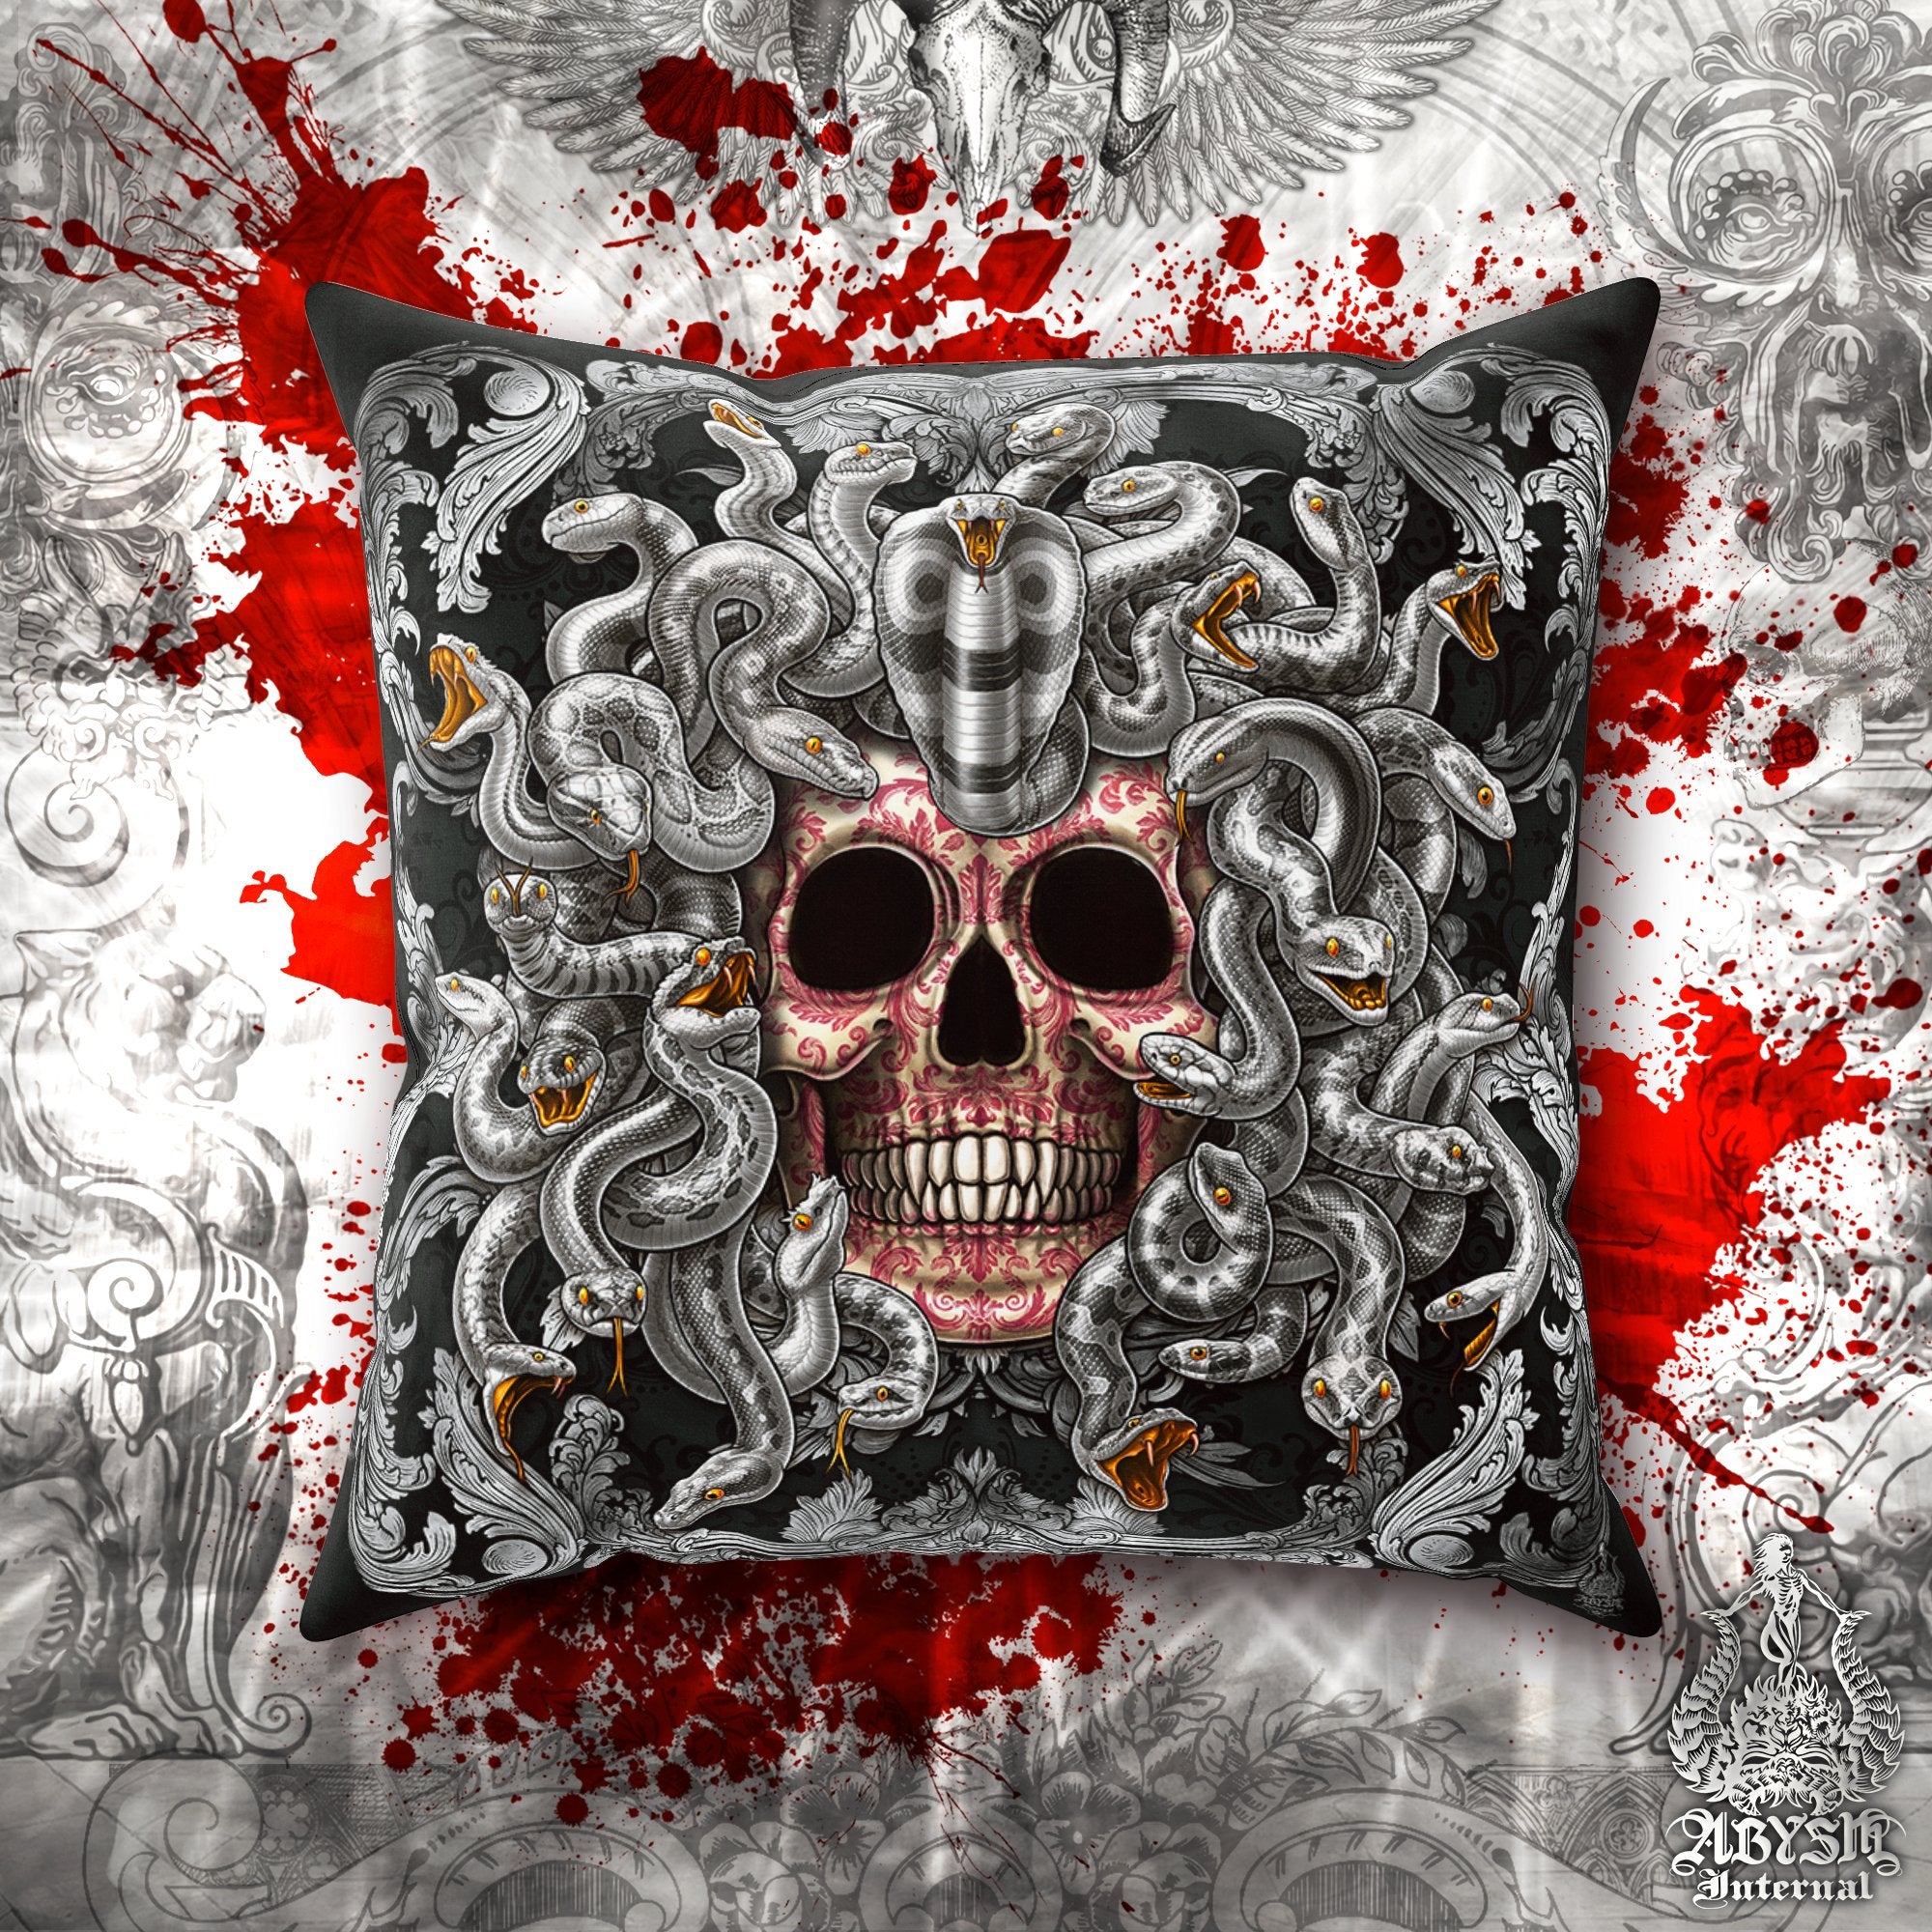 Silver Medusa Throw Pillow, Decorative Accent Pillow, Square Cushion Cover, Victorian Goth, Fantasy and Skull Art, Alternative Home Decor - 2 Faces - Abysm Internal